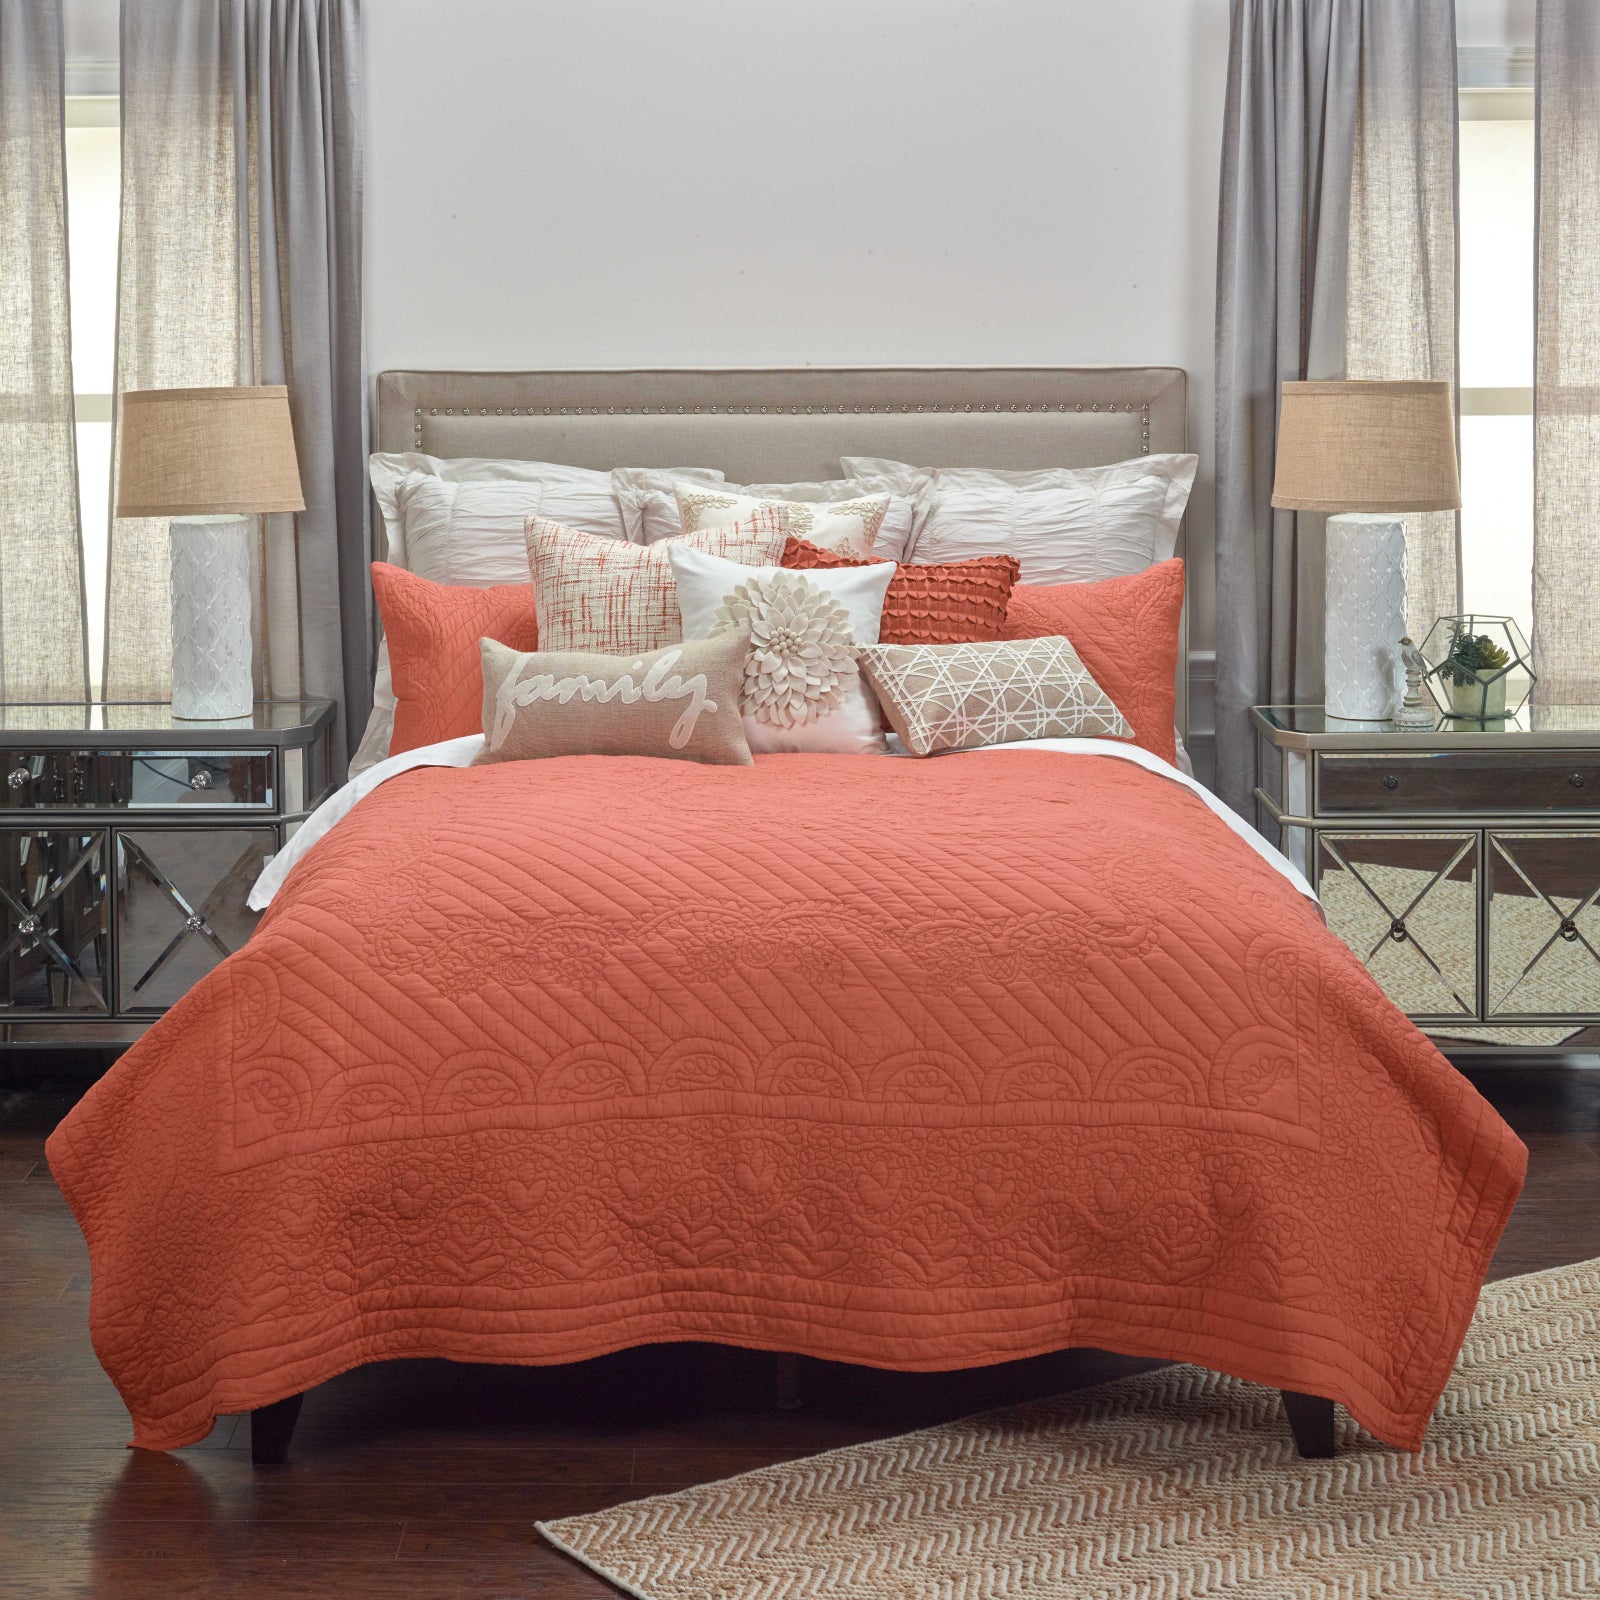 Rizzy BT1790 Moroccan Fling Coral Pink Bedding main image